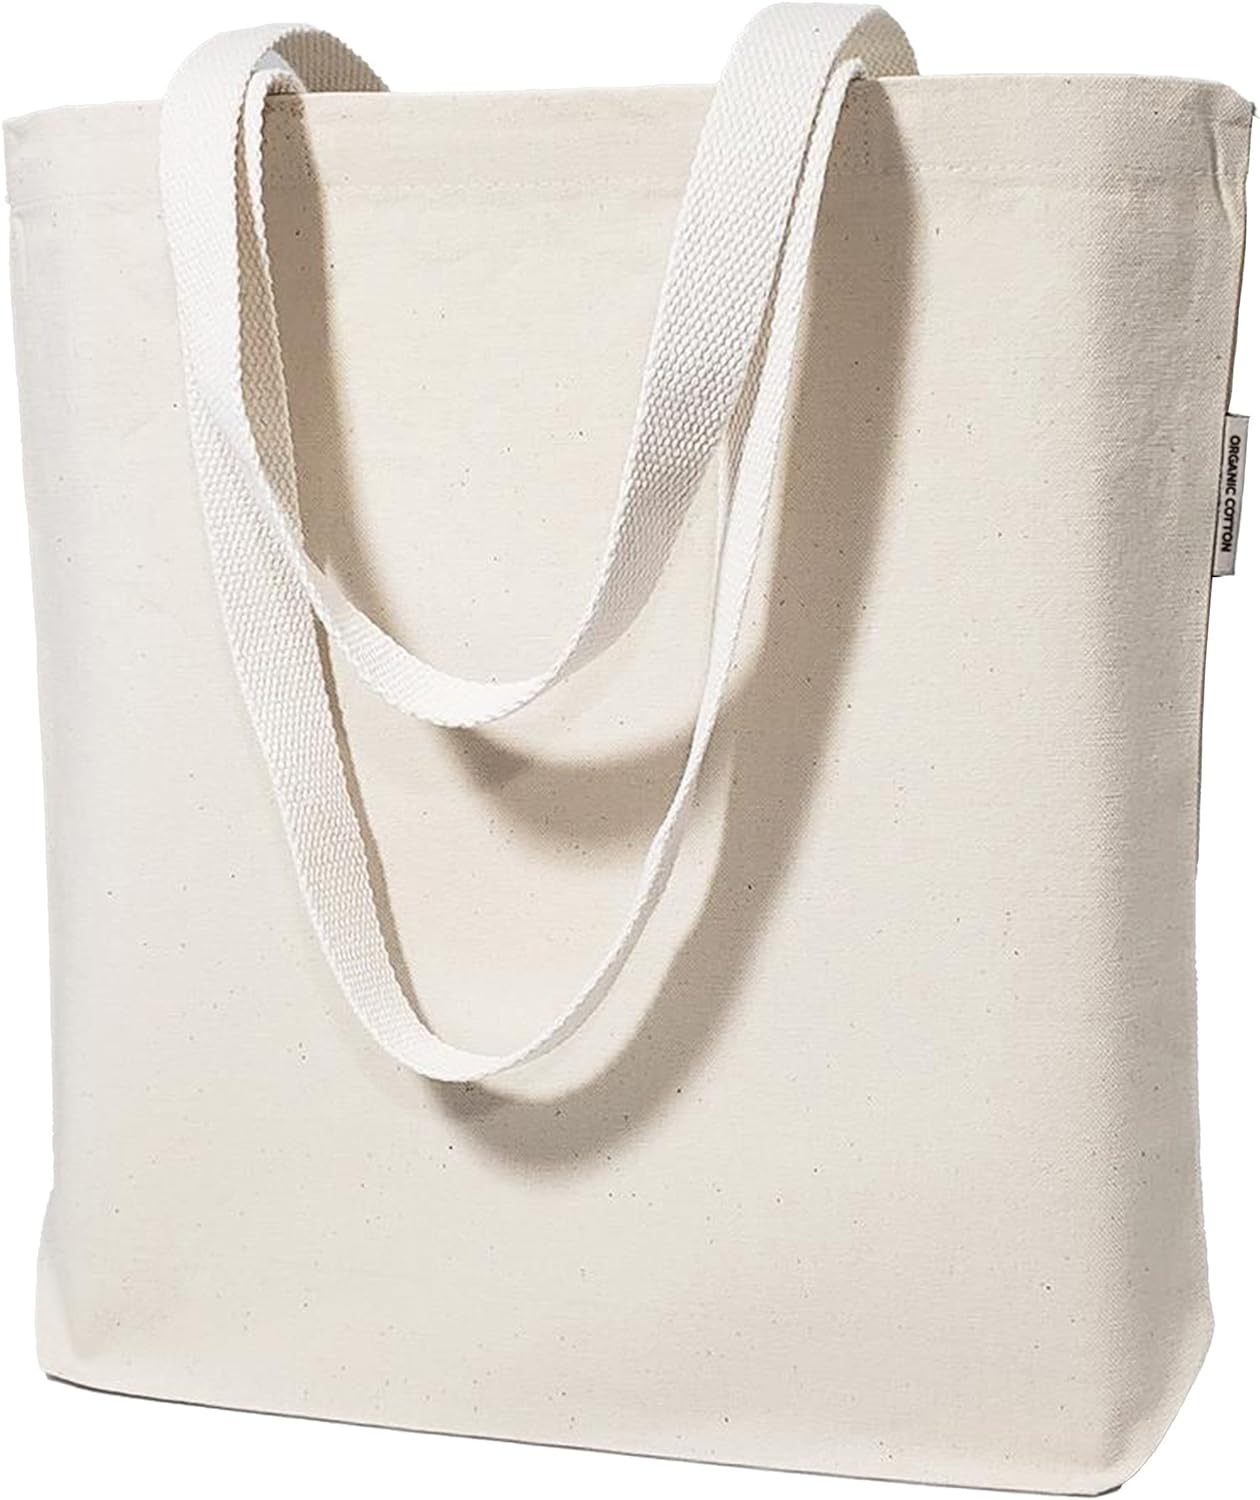 Blank Bulk Canvas Tote Bags Wholesale Organic, Natural Color Plain Bags for Decorating, Heat Transfer, Printing, DIY, Crafts